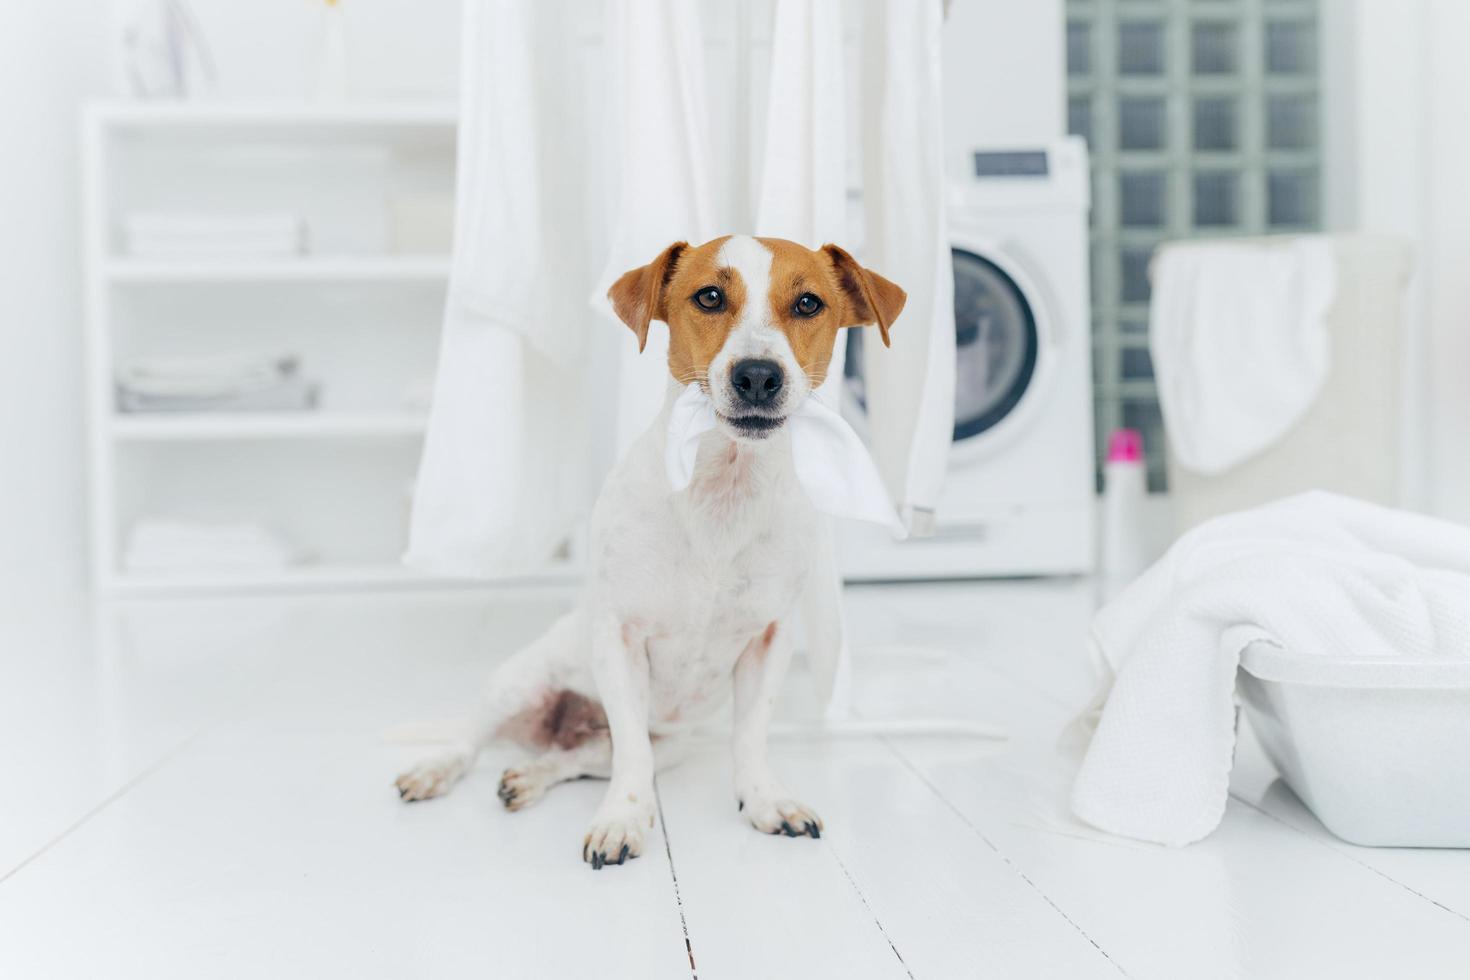 Indoor shot of little pedigree dog bites hanged white linen, poses on floor in laundry room at home. Hygiene, cleanliness and household concept photo